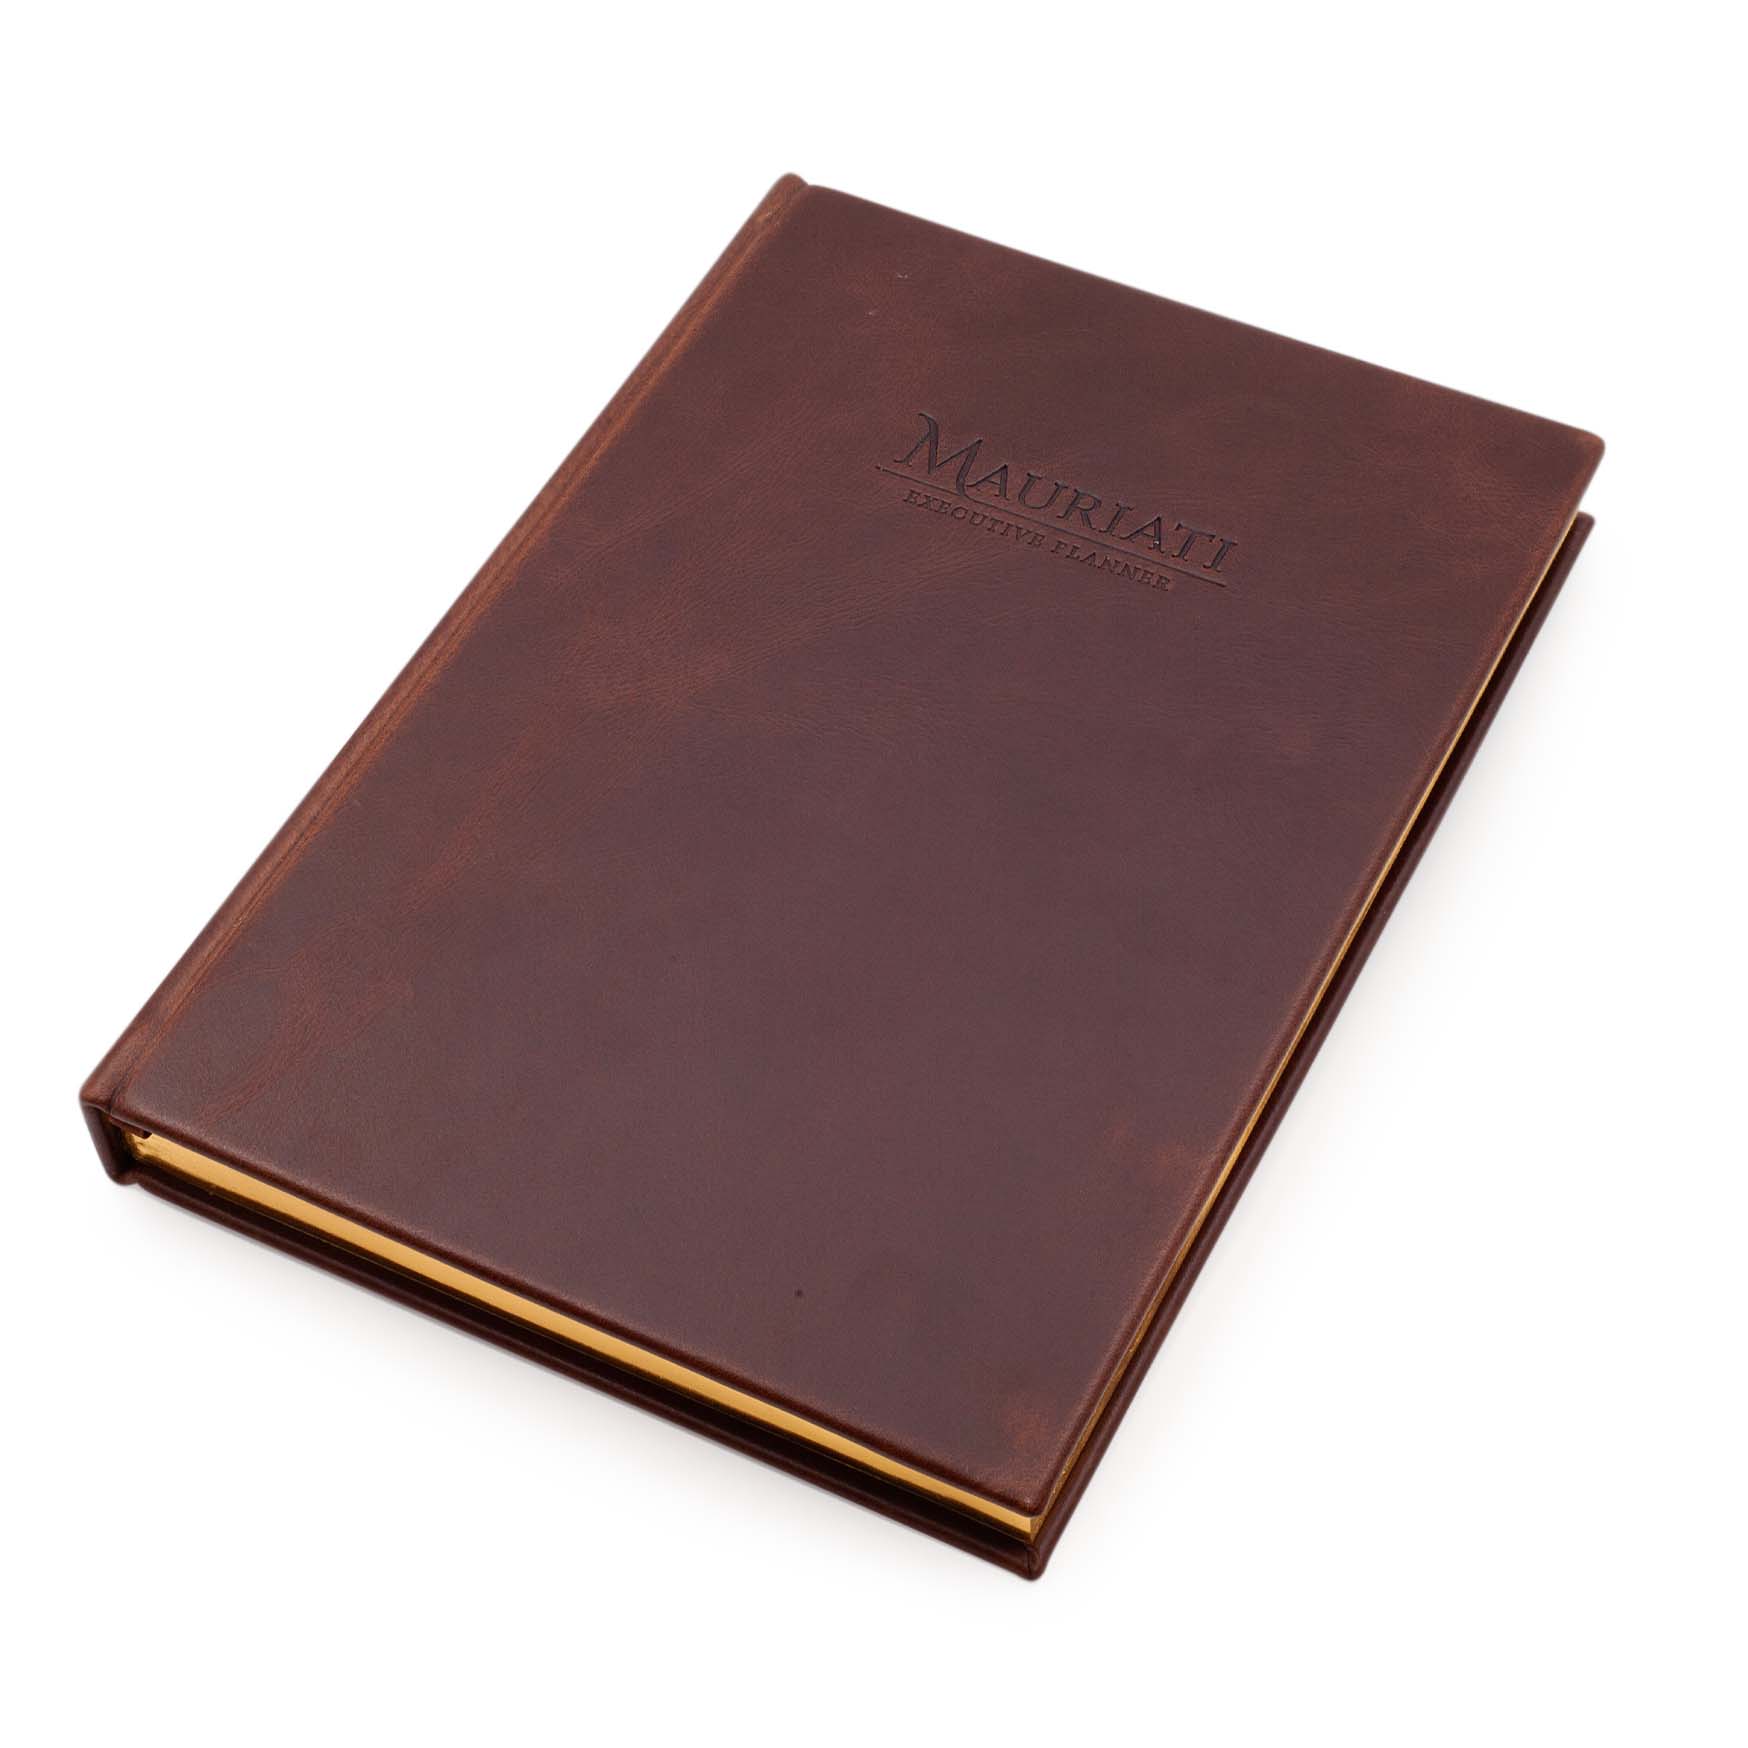 Image shows a top, front view of a Rustik Brown leather Mauriati Planner